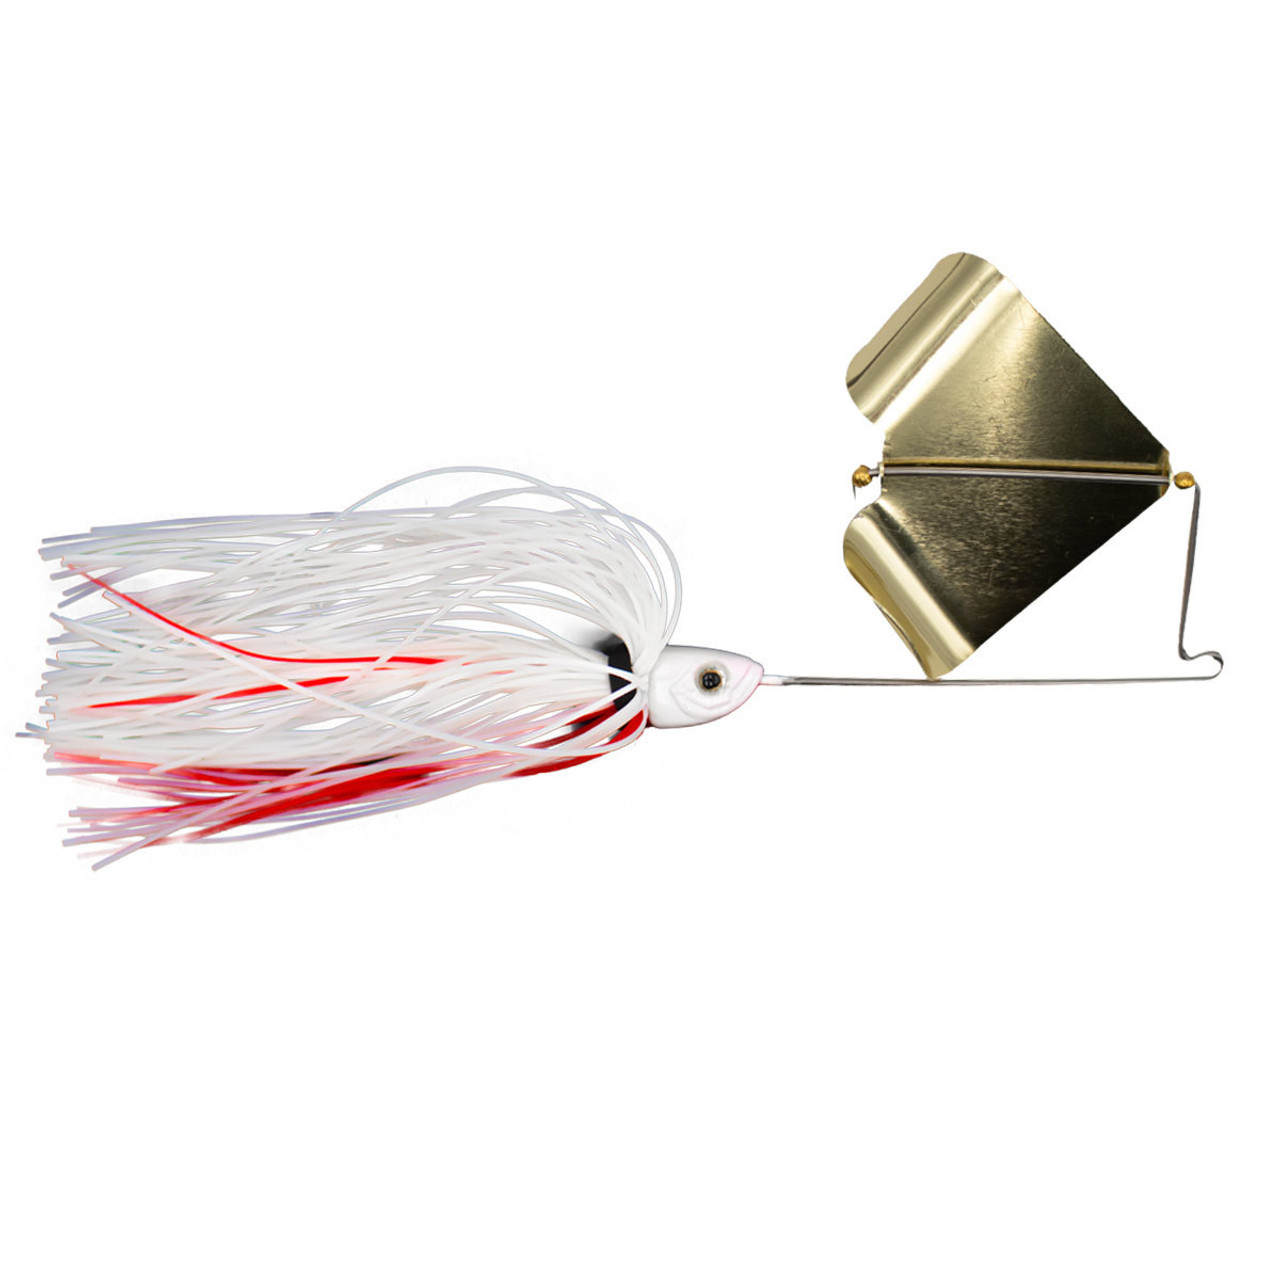 Rogers Shifty Buzz Bait - Gold